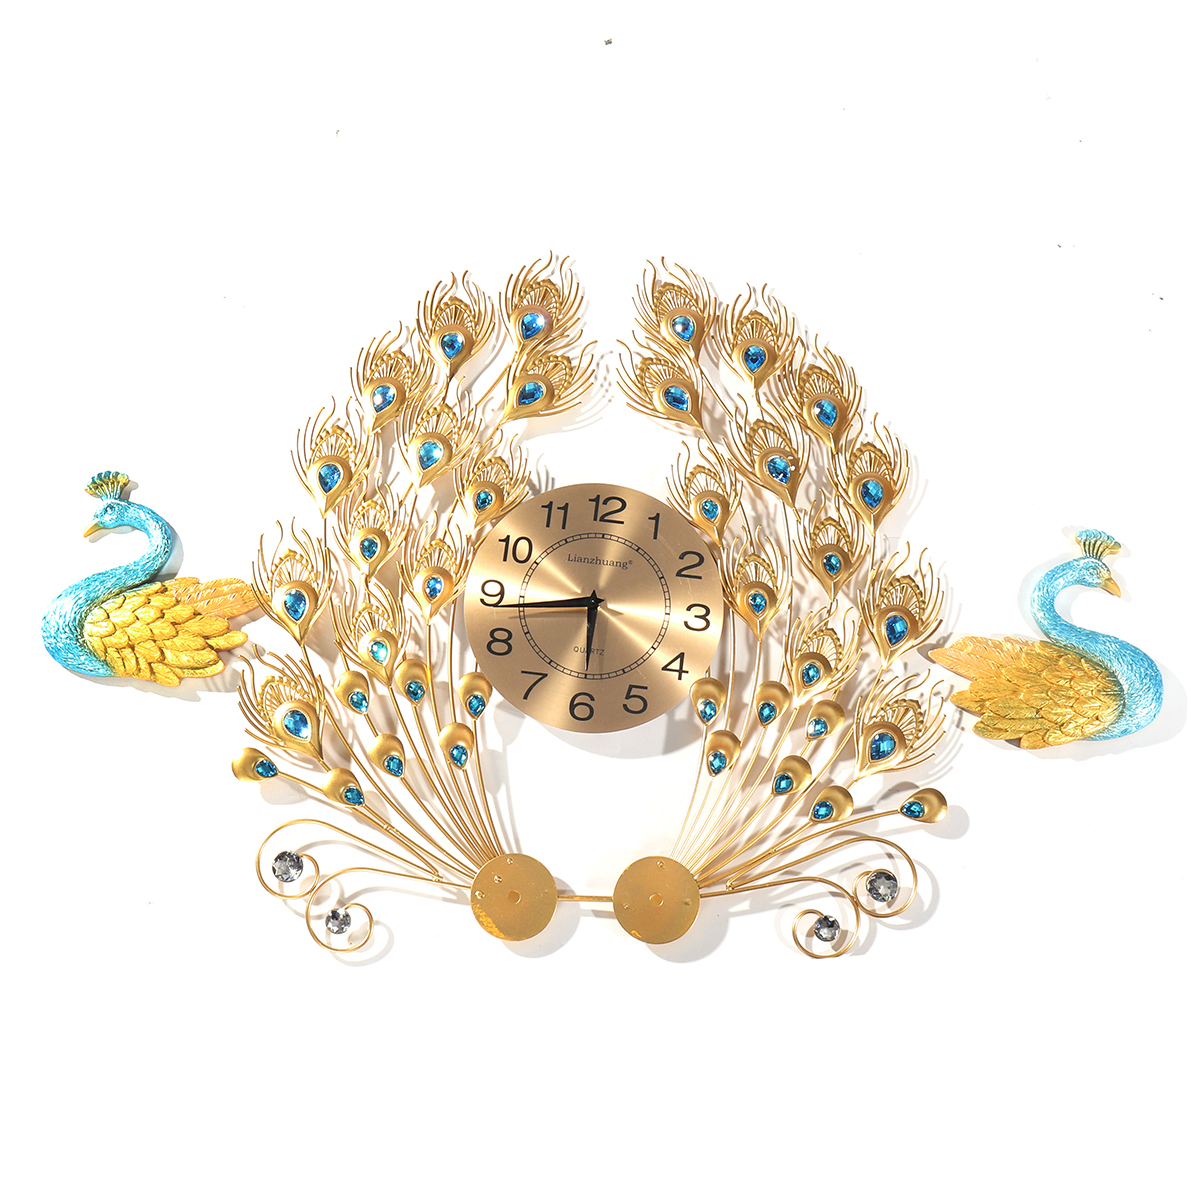 3D-Peacock-Wall-Clock-Large-Accurate-Mute-Metal-Art-Creative-Decor-Home-1743546-13